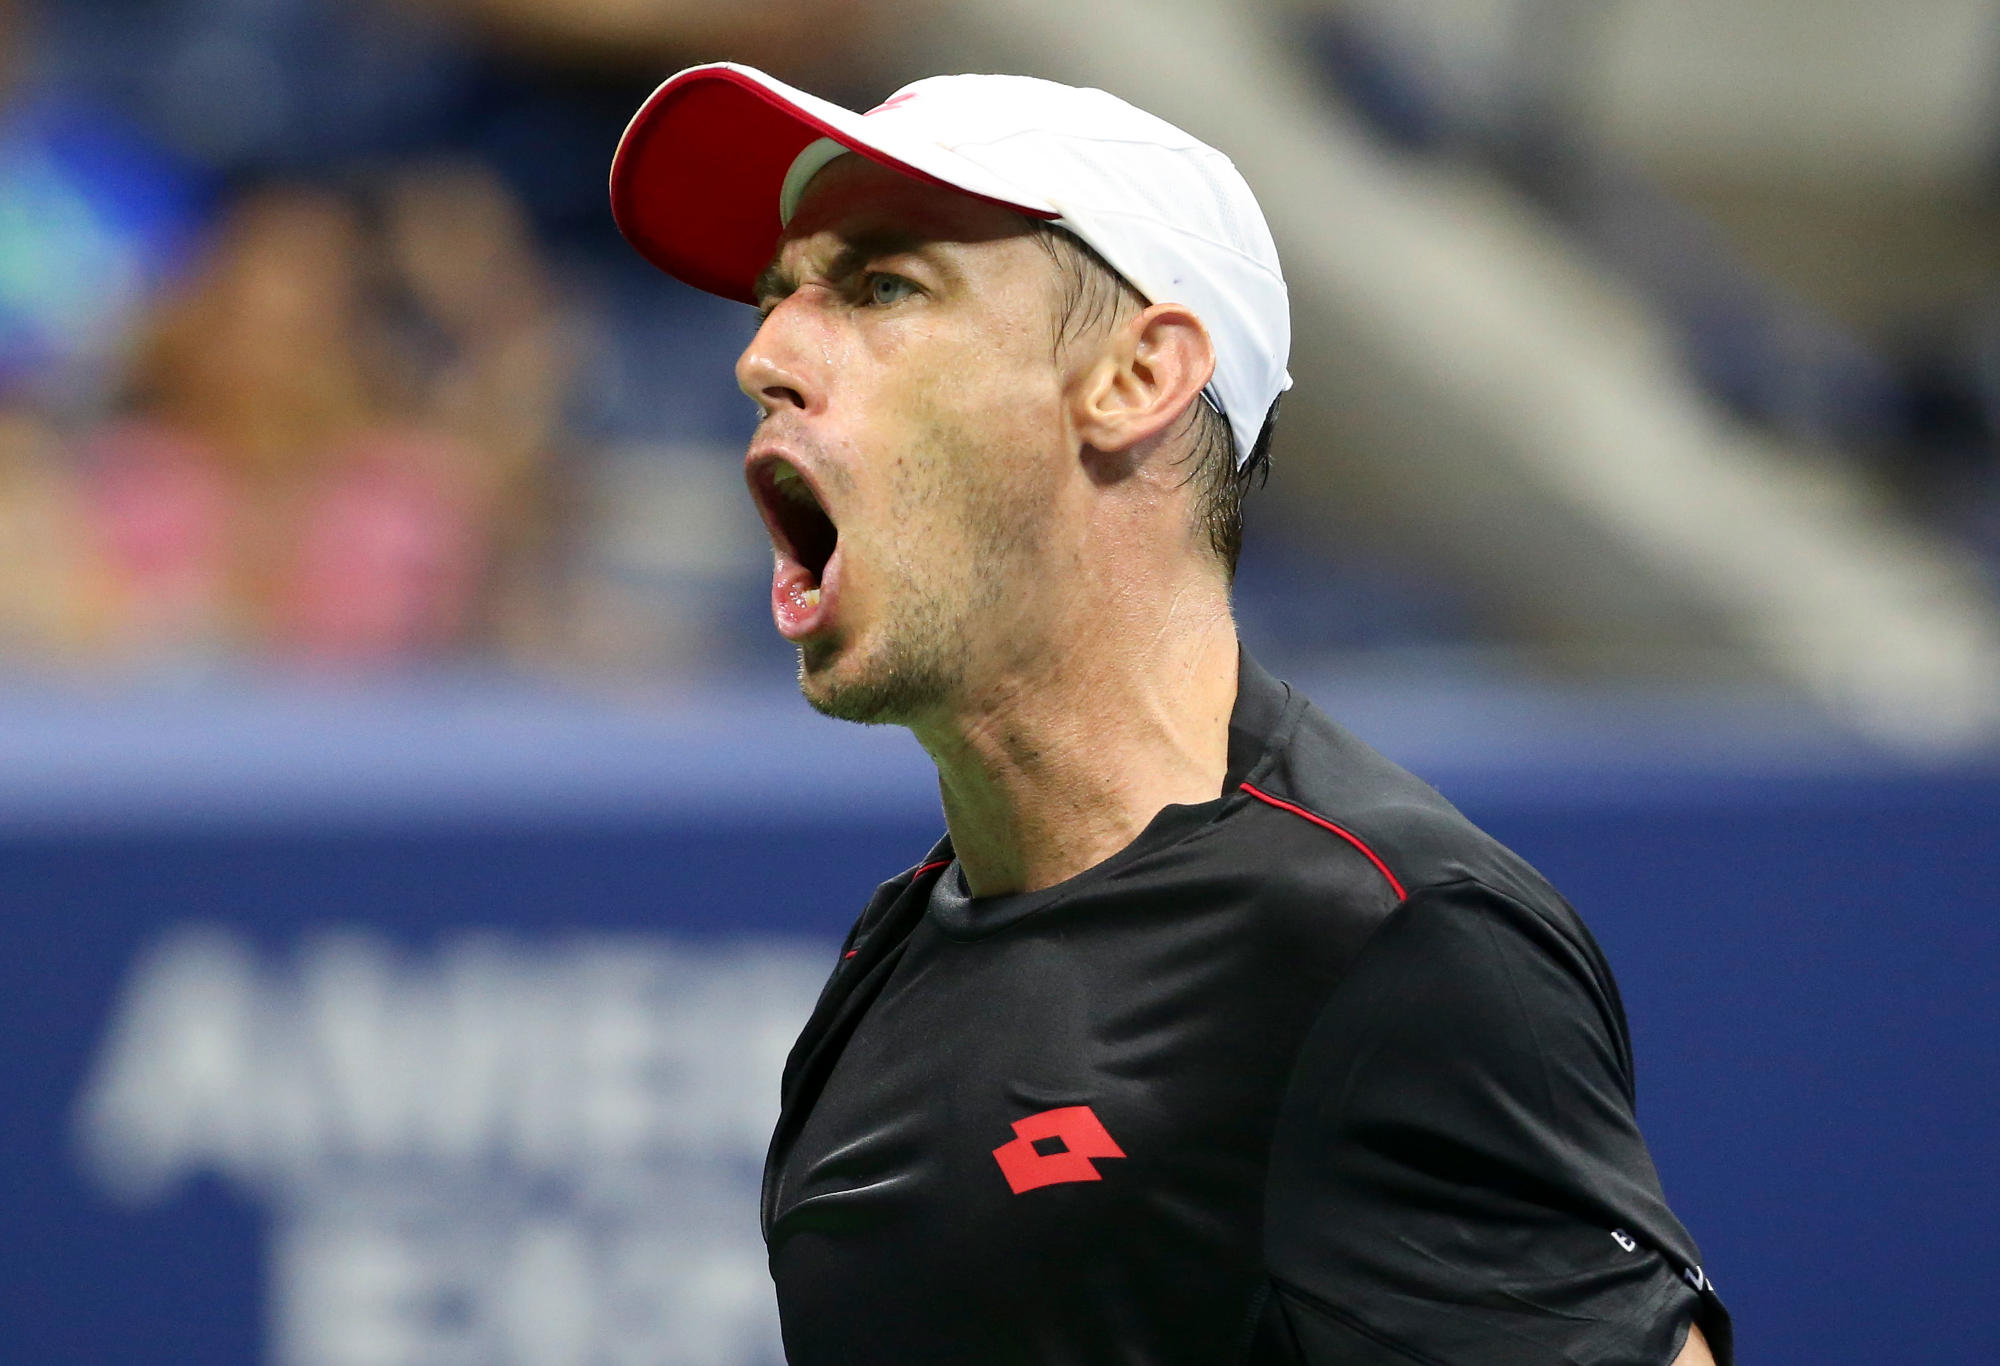 John Millman celebrates during his victory over Roger Federer at the 2018 US Open.